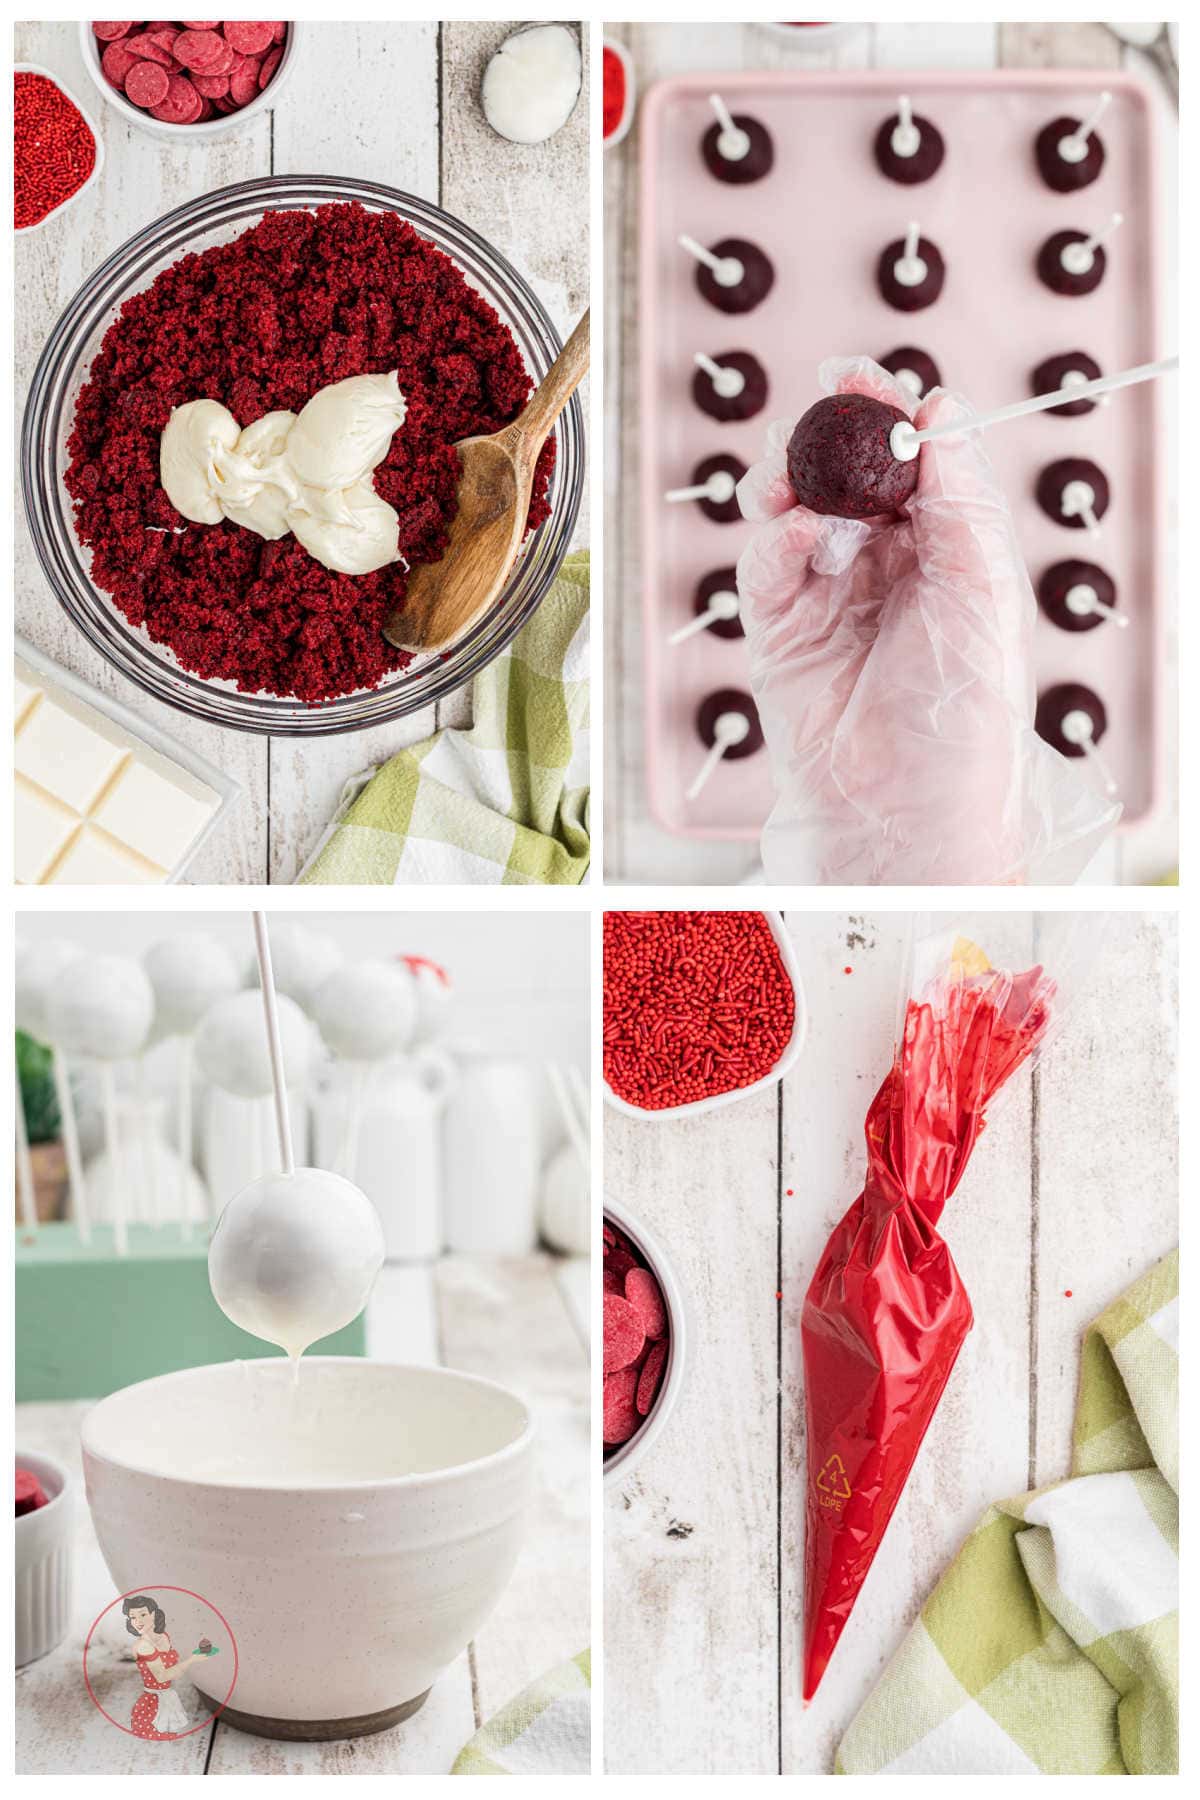 Step by step images showing how to make red velvet cake pops.